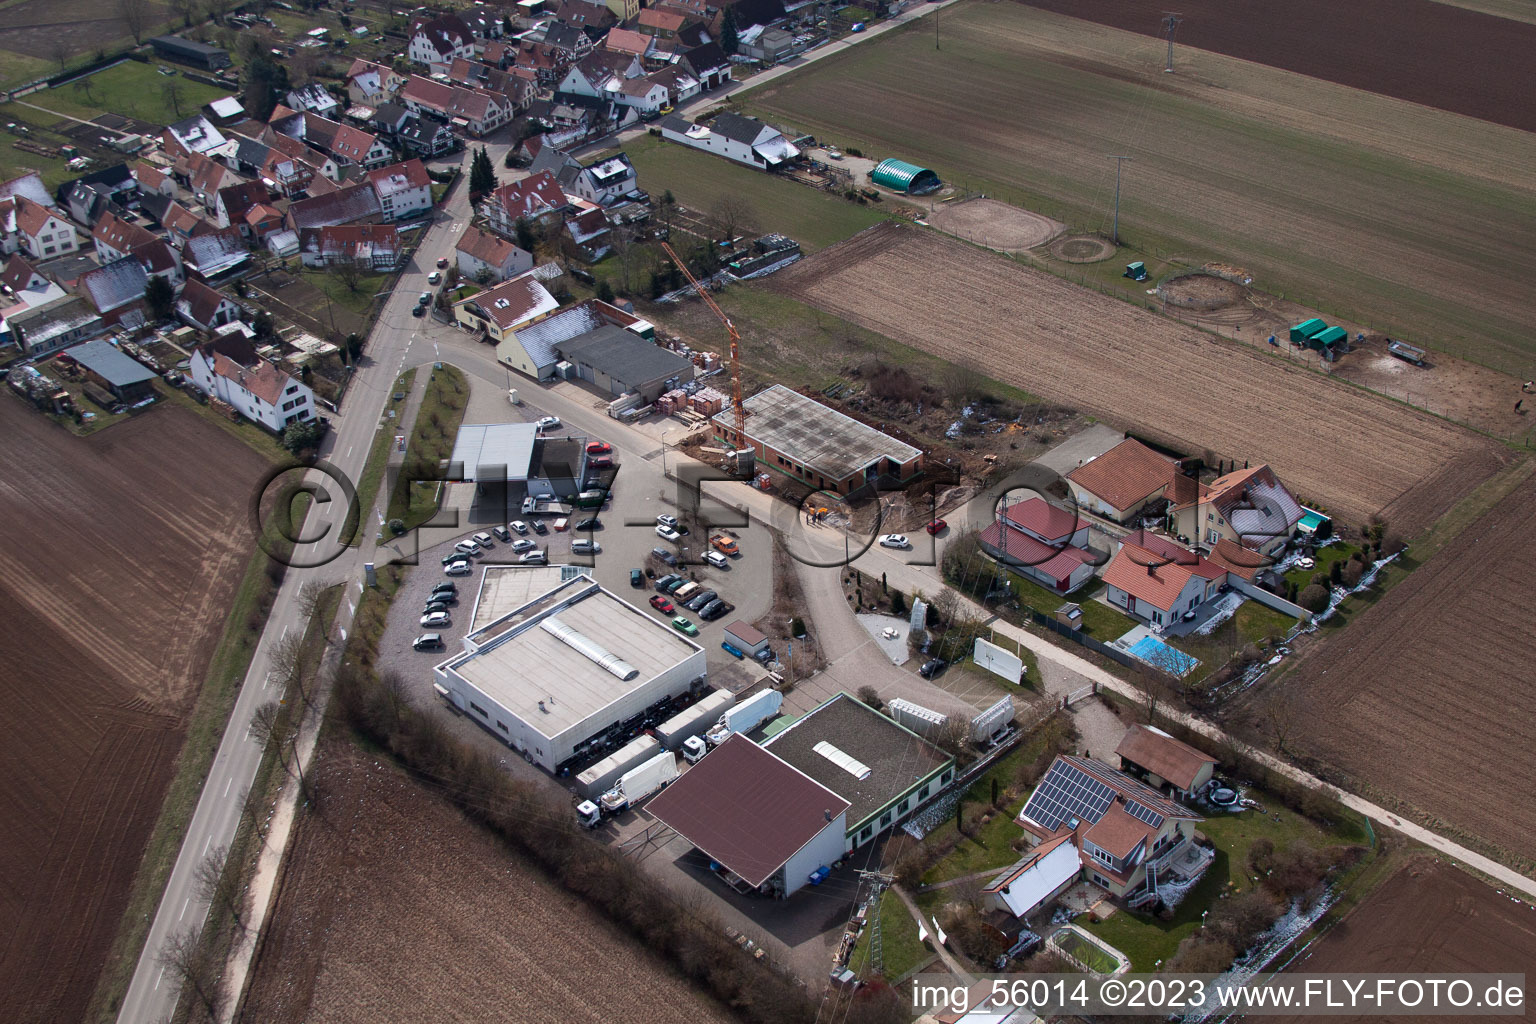 Industrial Estate in Freckenfeld in the state Rhineland-Palatinate, Germany out of the air